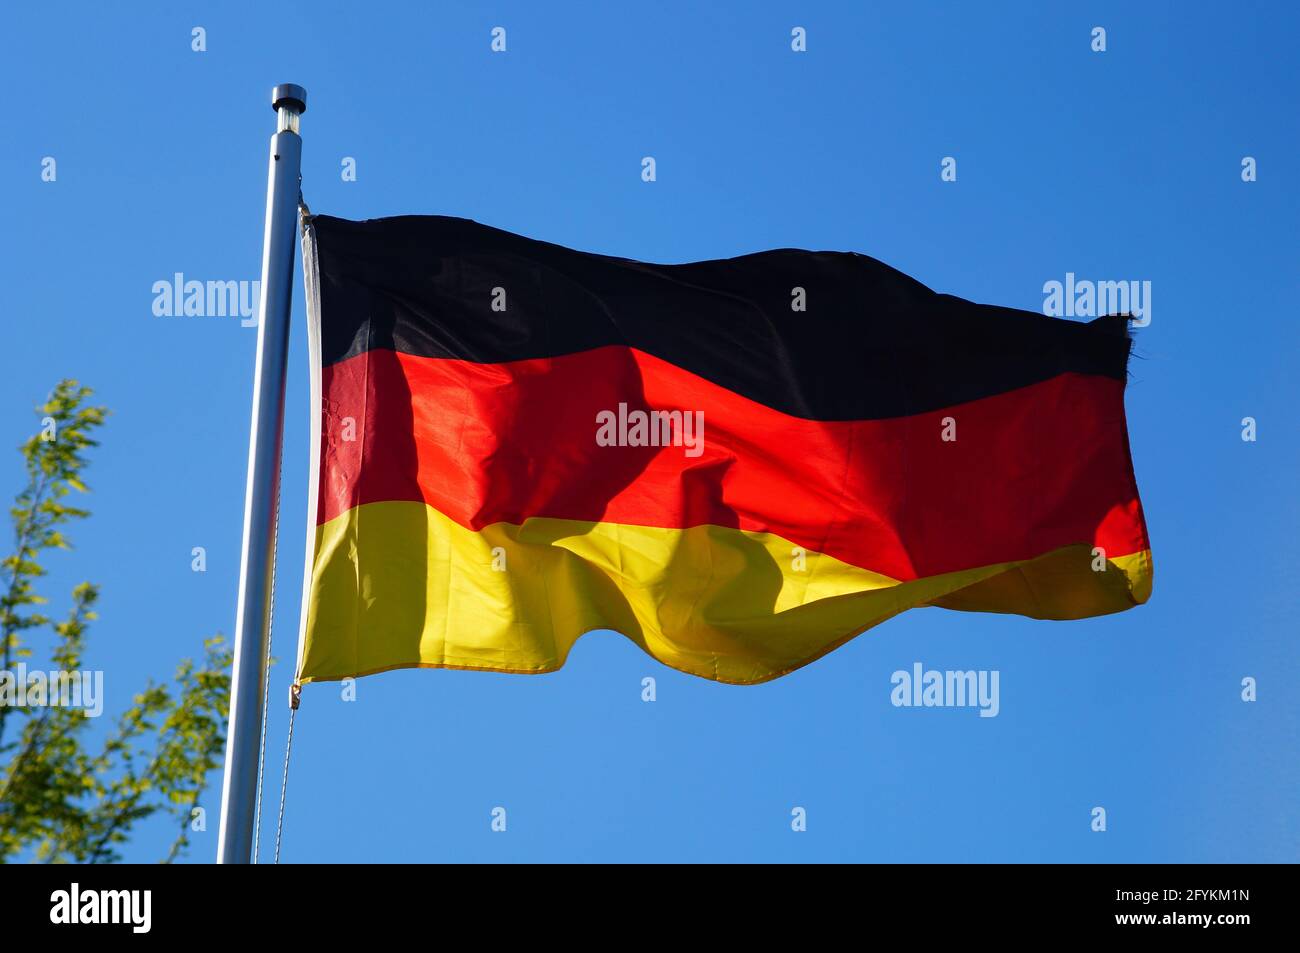 The German flag flies in the evening light. Stock Photo